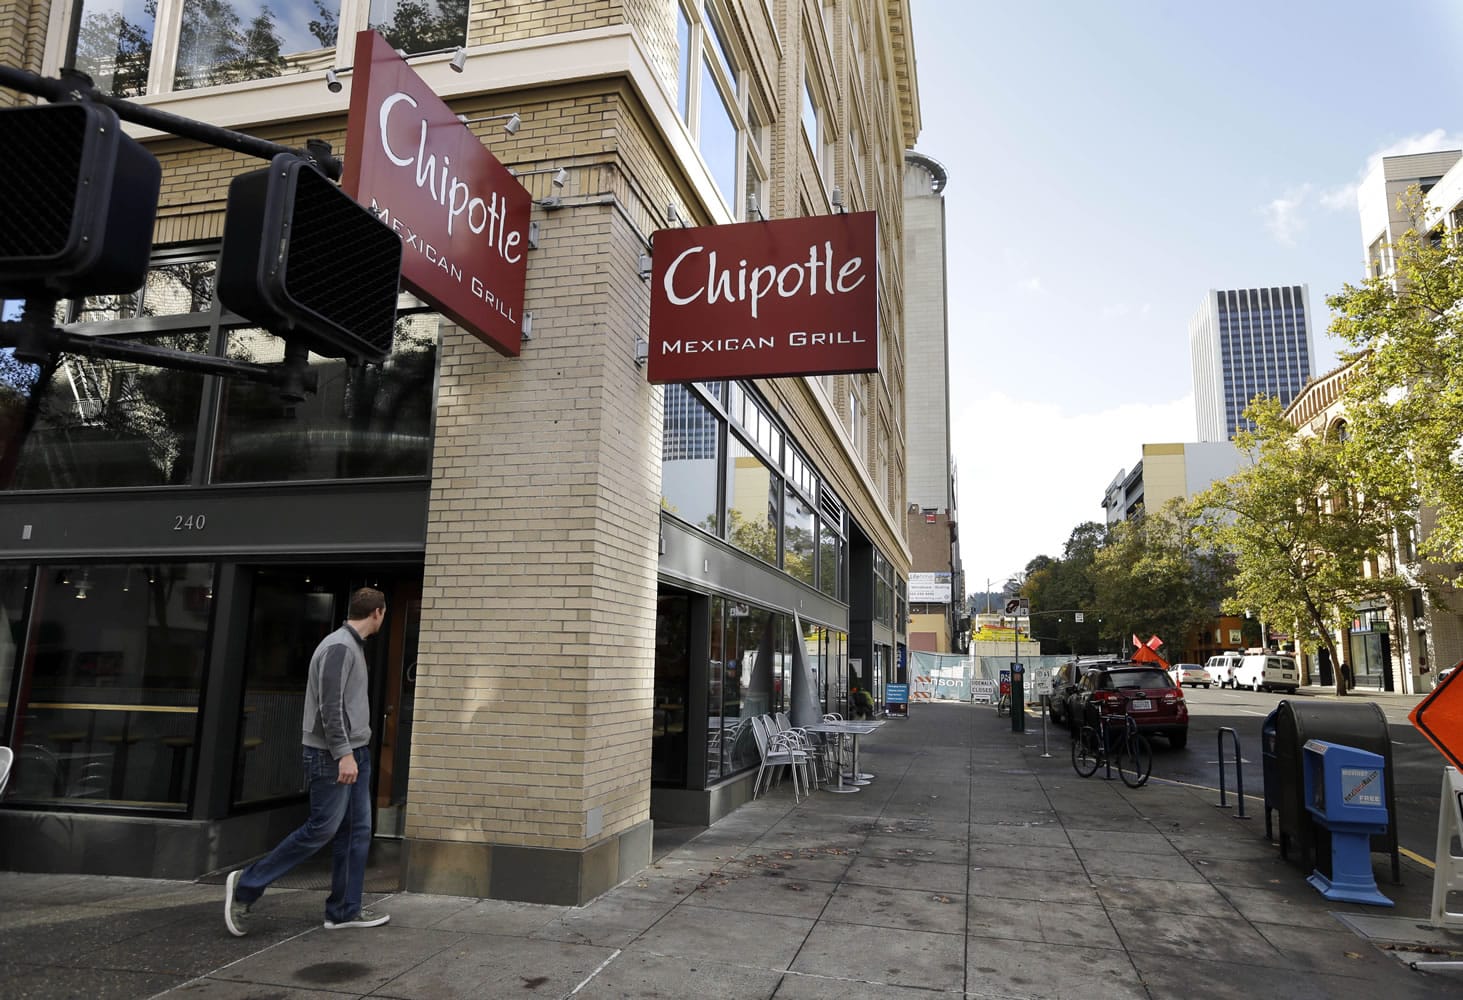 A pedestrian walks past a closed Chipotle restaurant in Portland on Monday. Chipotle voluntarily closed down 43 of its locations in Washington and in the Portland area as a precaution after an E. coli outbreak linked to six of its restaurants in the two states has sickened nearly two dozen people.